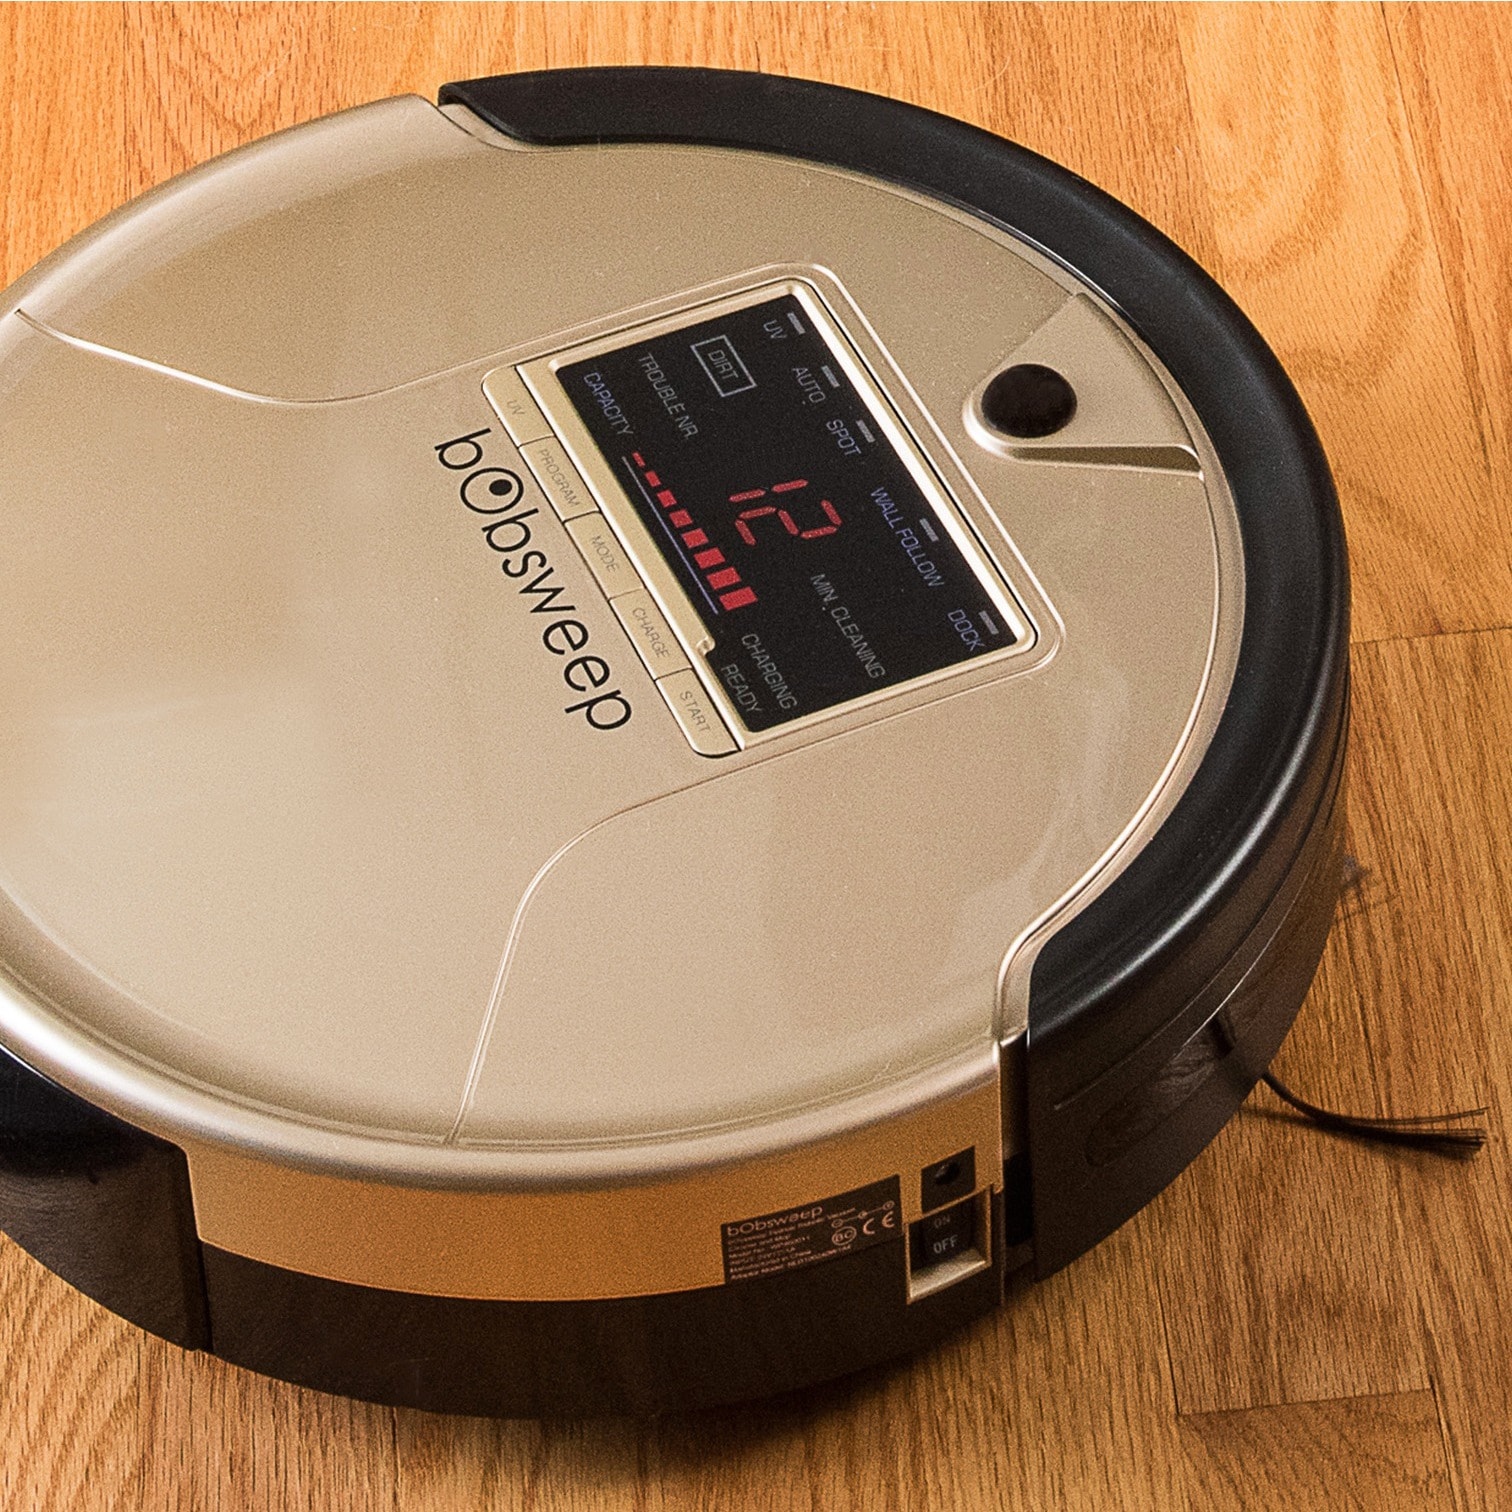 BObsweep PetHair Robotic Vacuum Cleaner And Mop Free Shipping